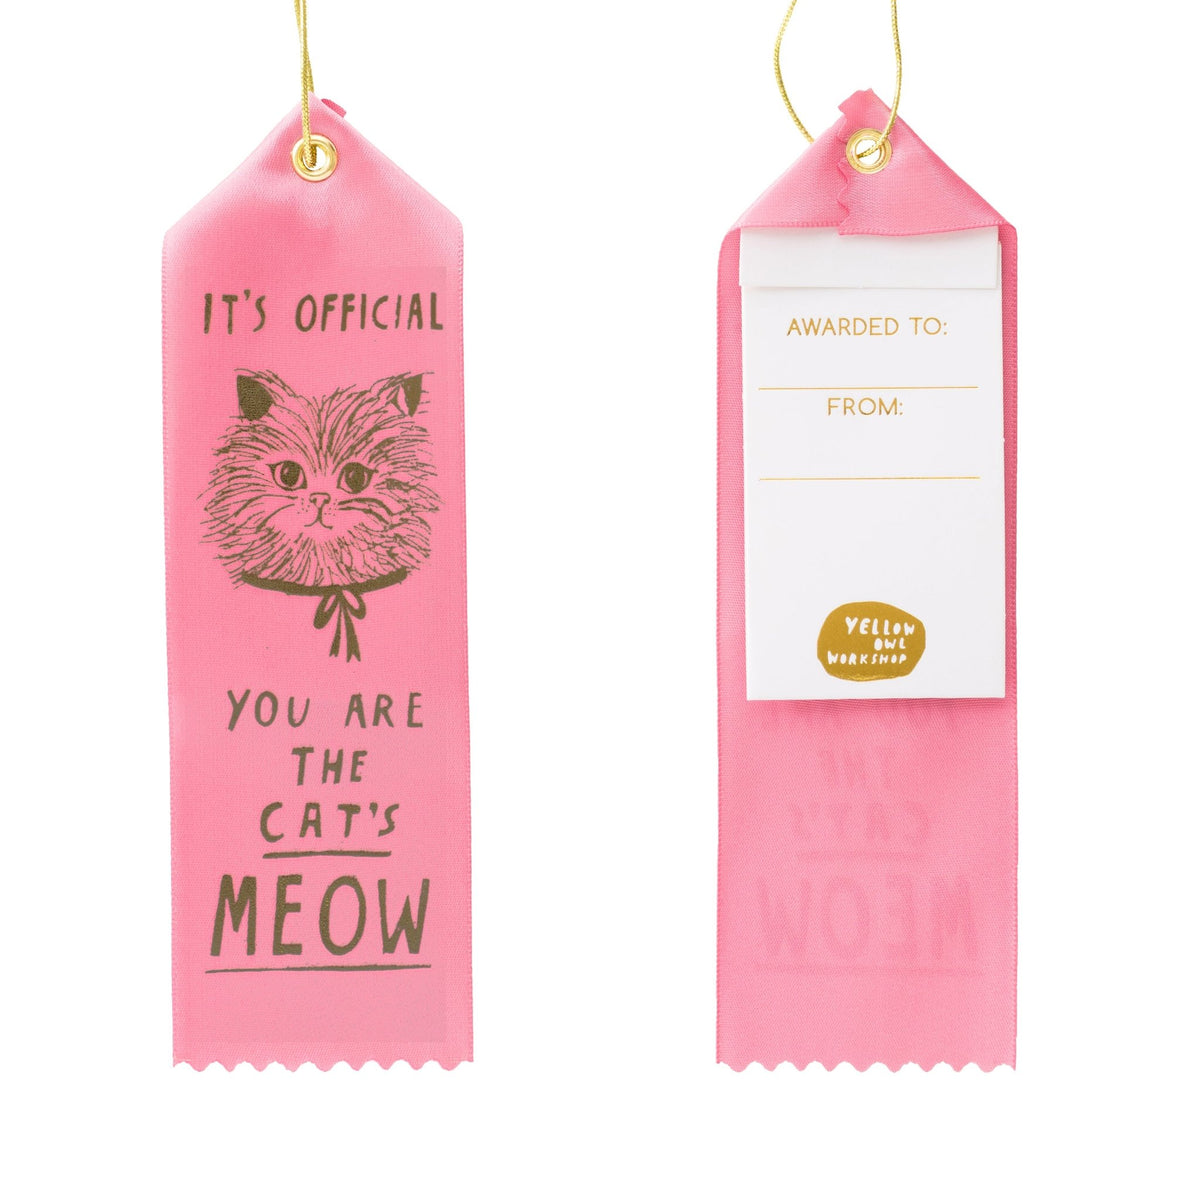 You are the Cat&#39;s Meow! - Award Ribbon Card - Yellow Owl Workshop